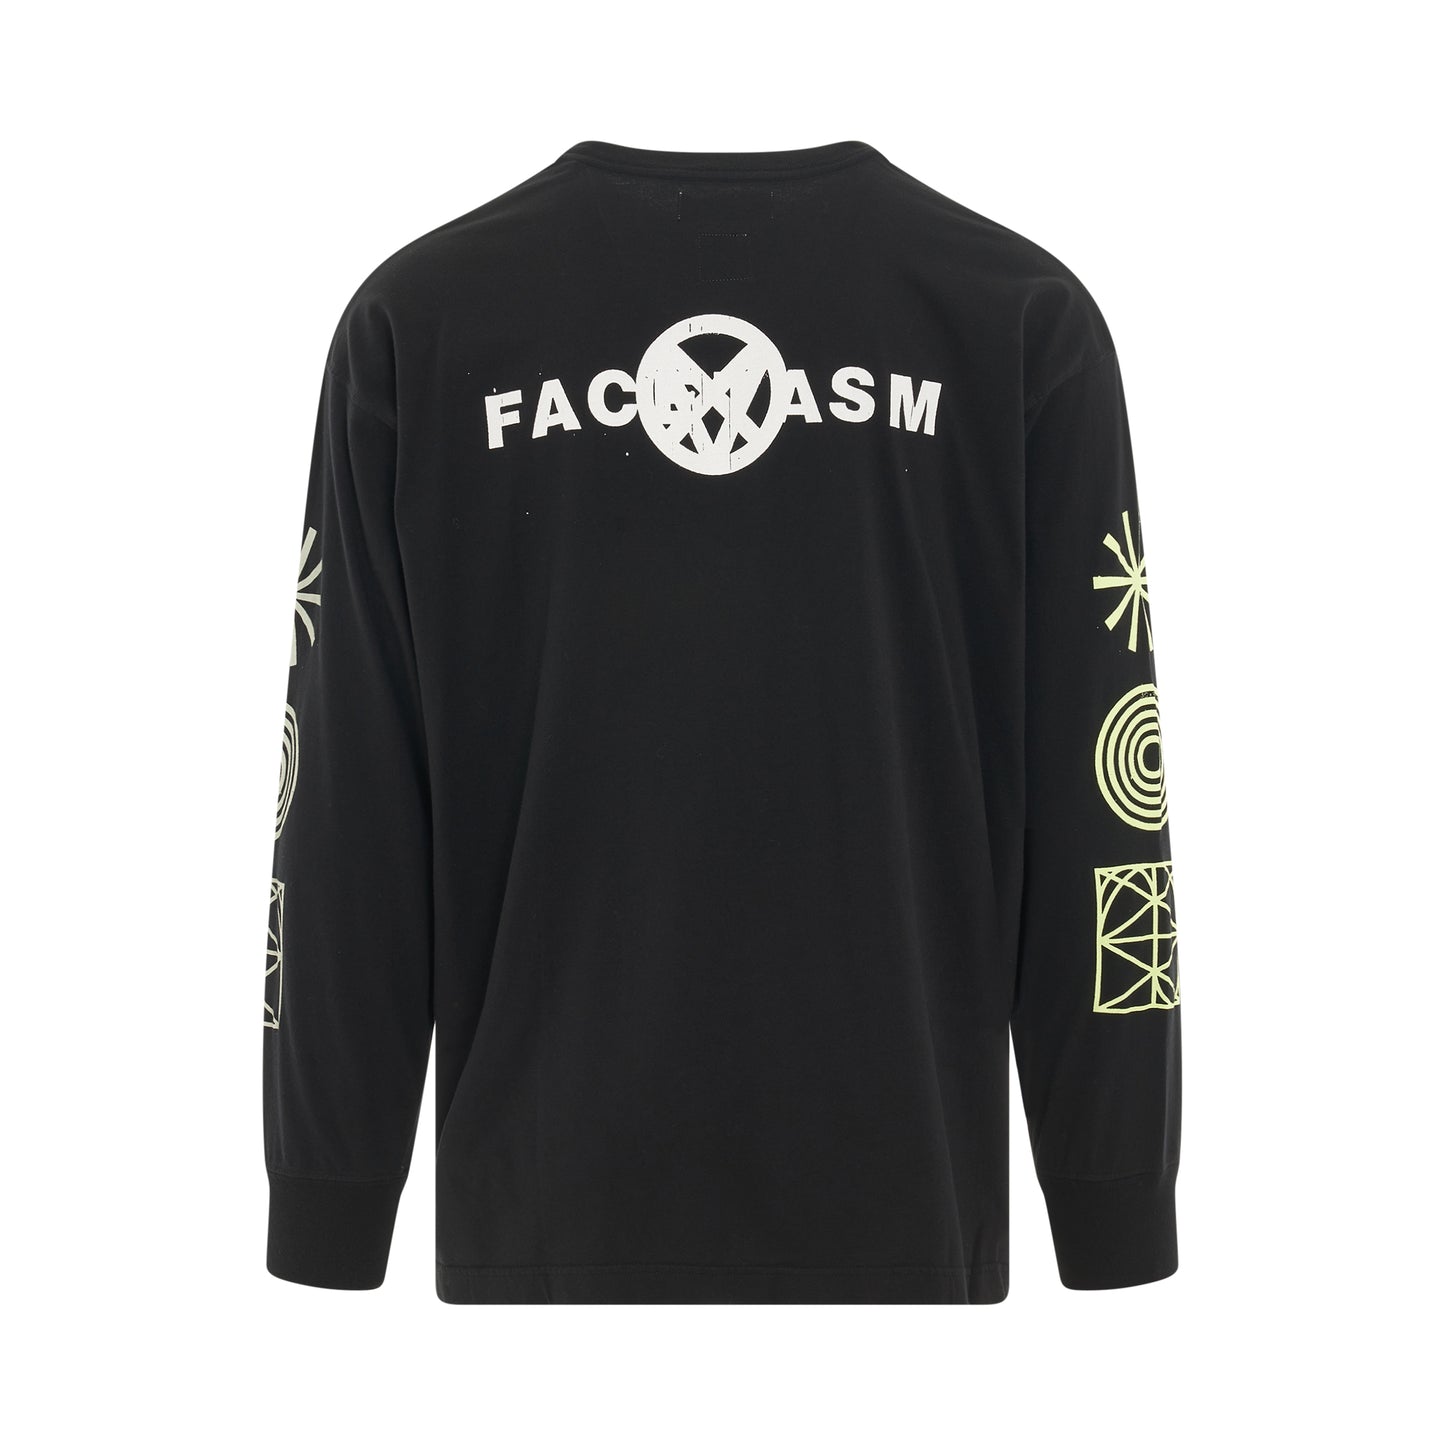 Anarchy Long Sleeve T-Shirt in Black